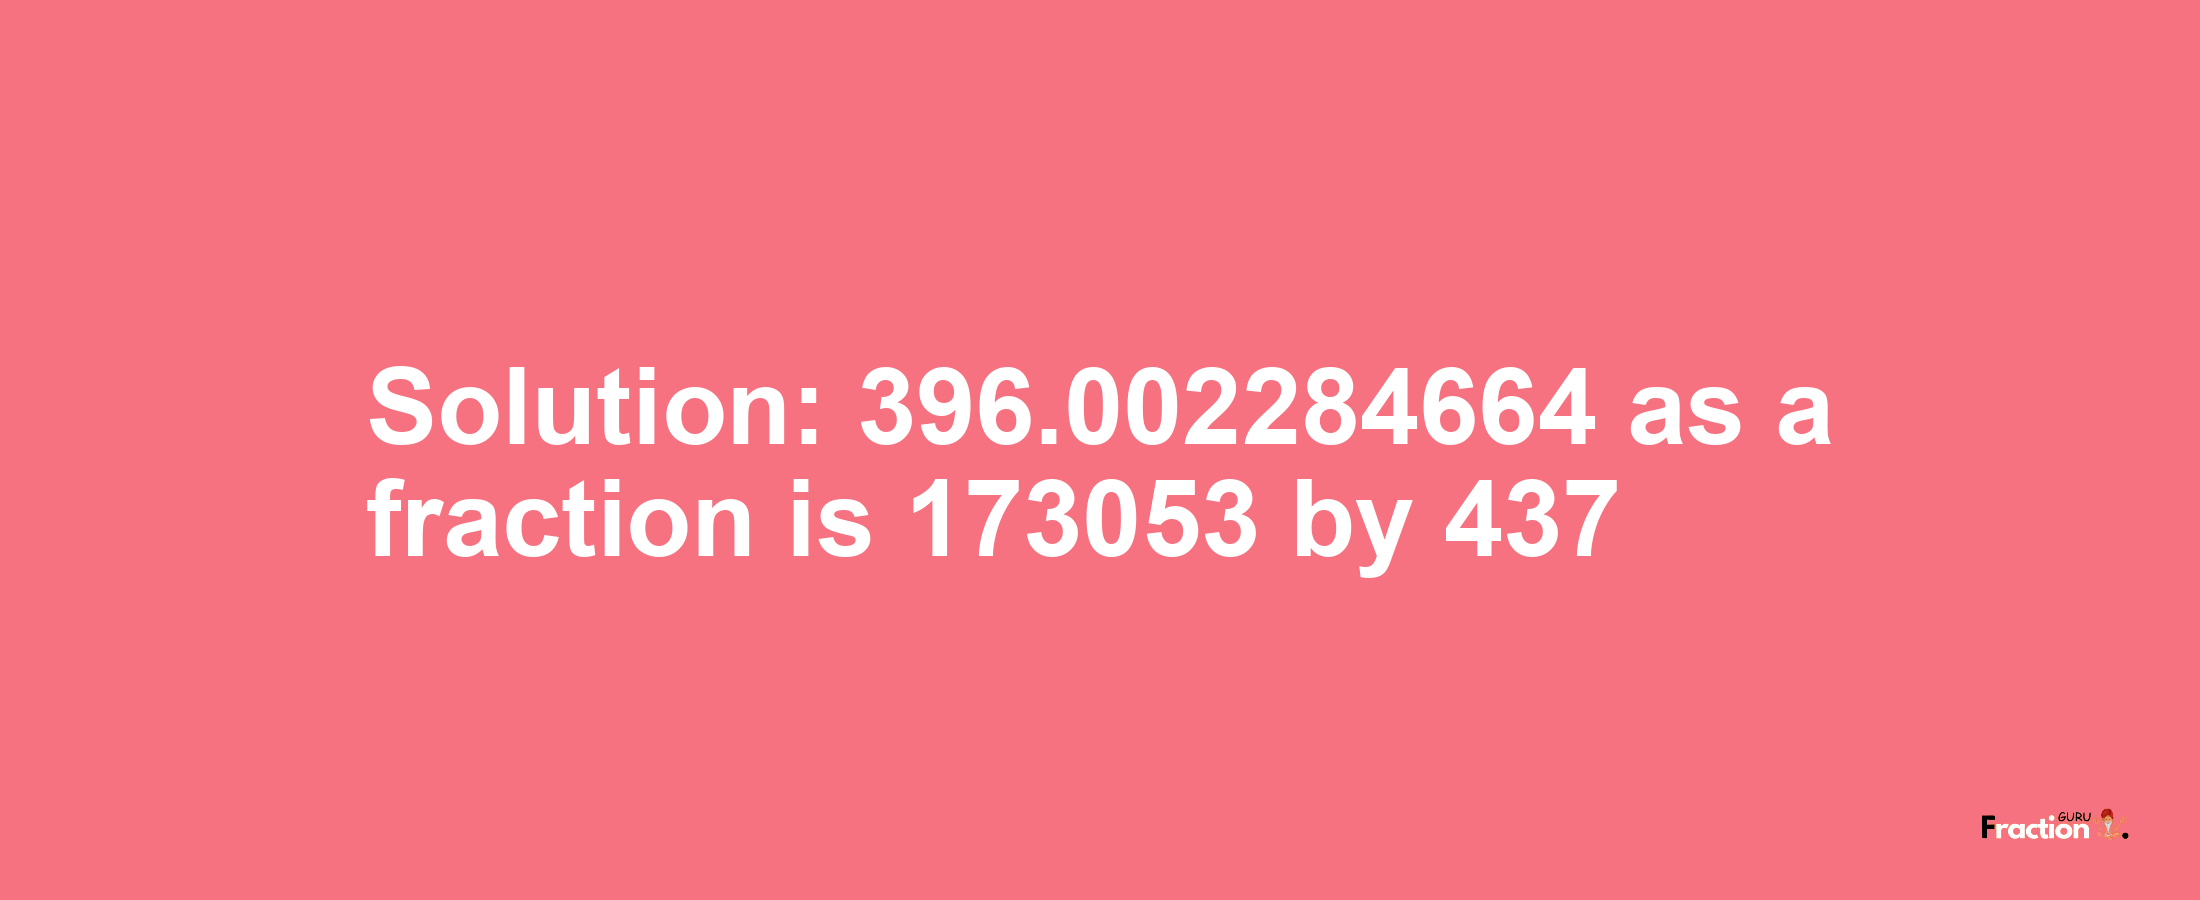 Solution:396.002284664 as a fraction is 173053/437